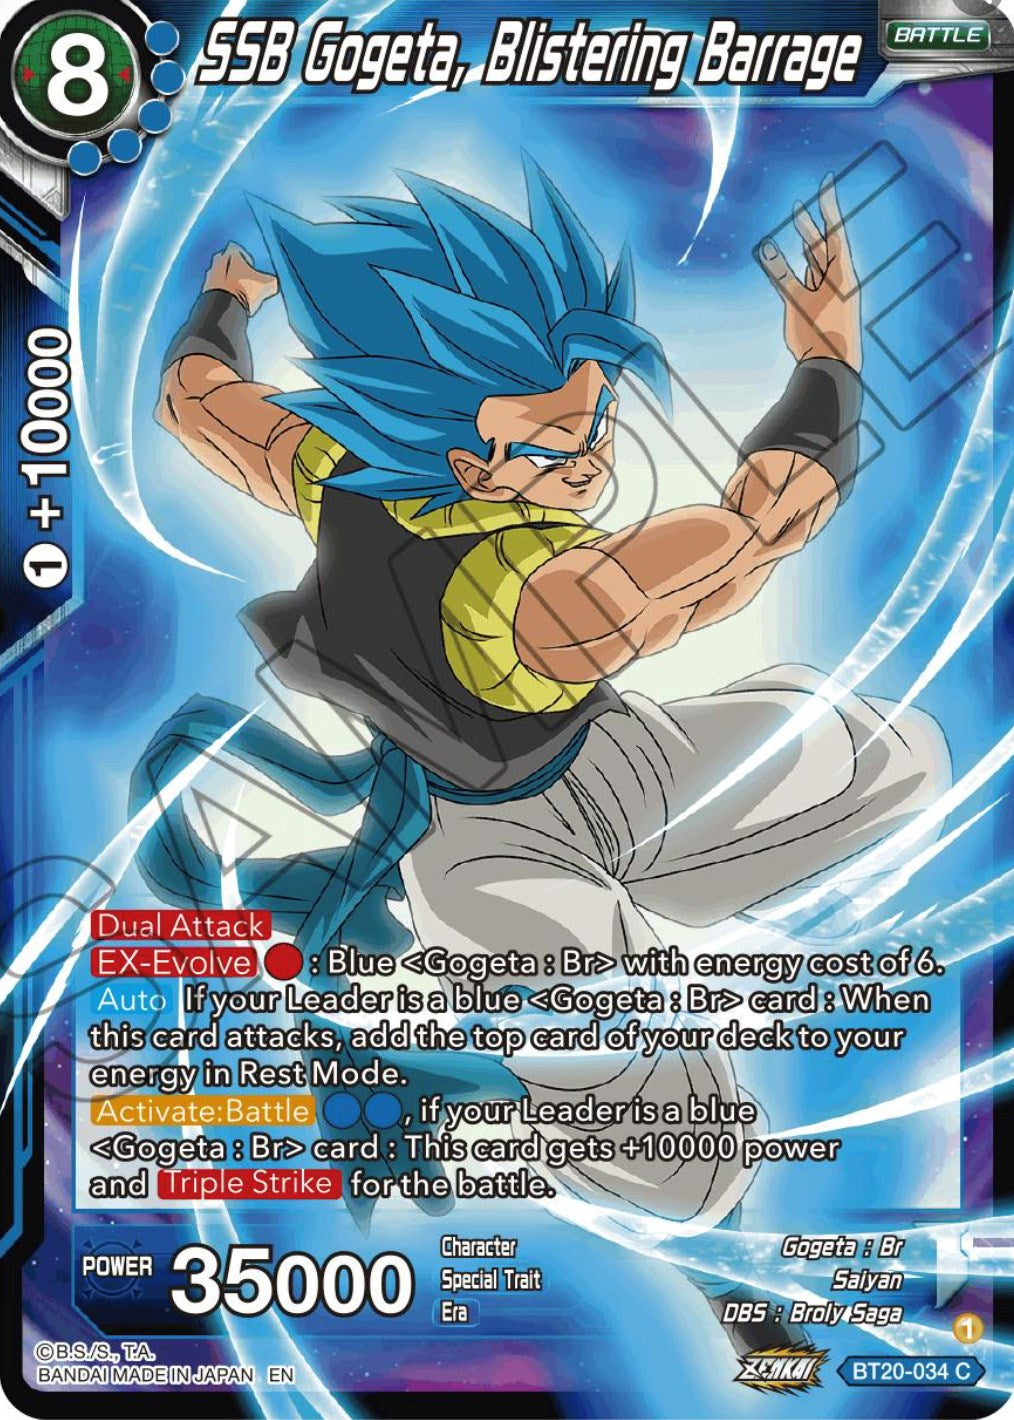 SSB Gogeta, Blistering Barrage (BT20-034) [Power Absorbed] | North Valley Games